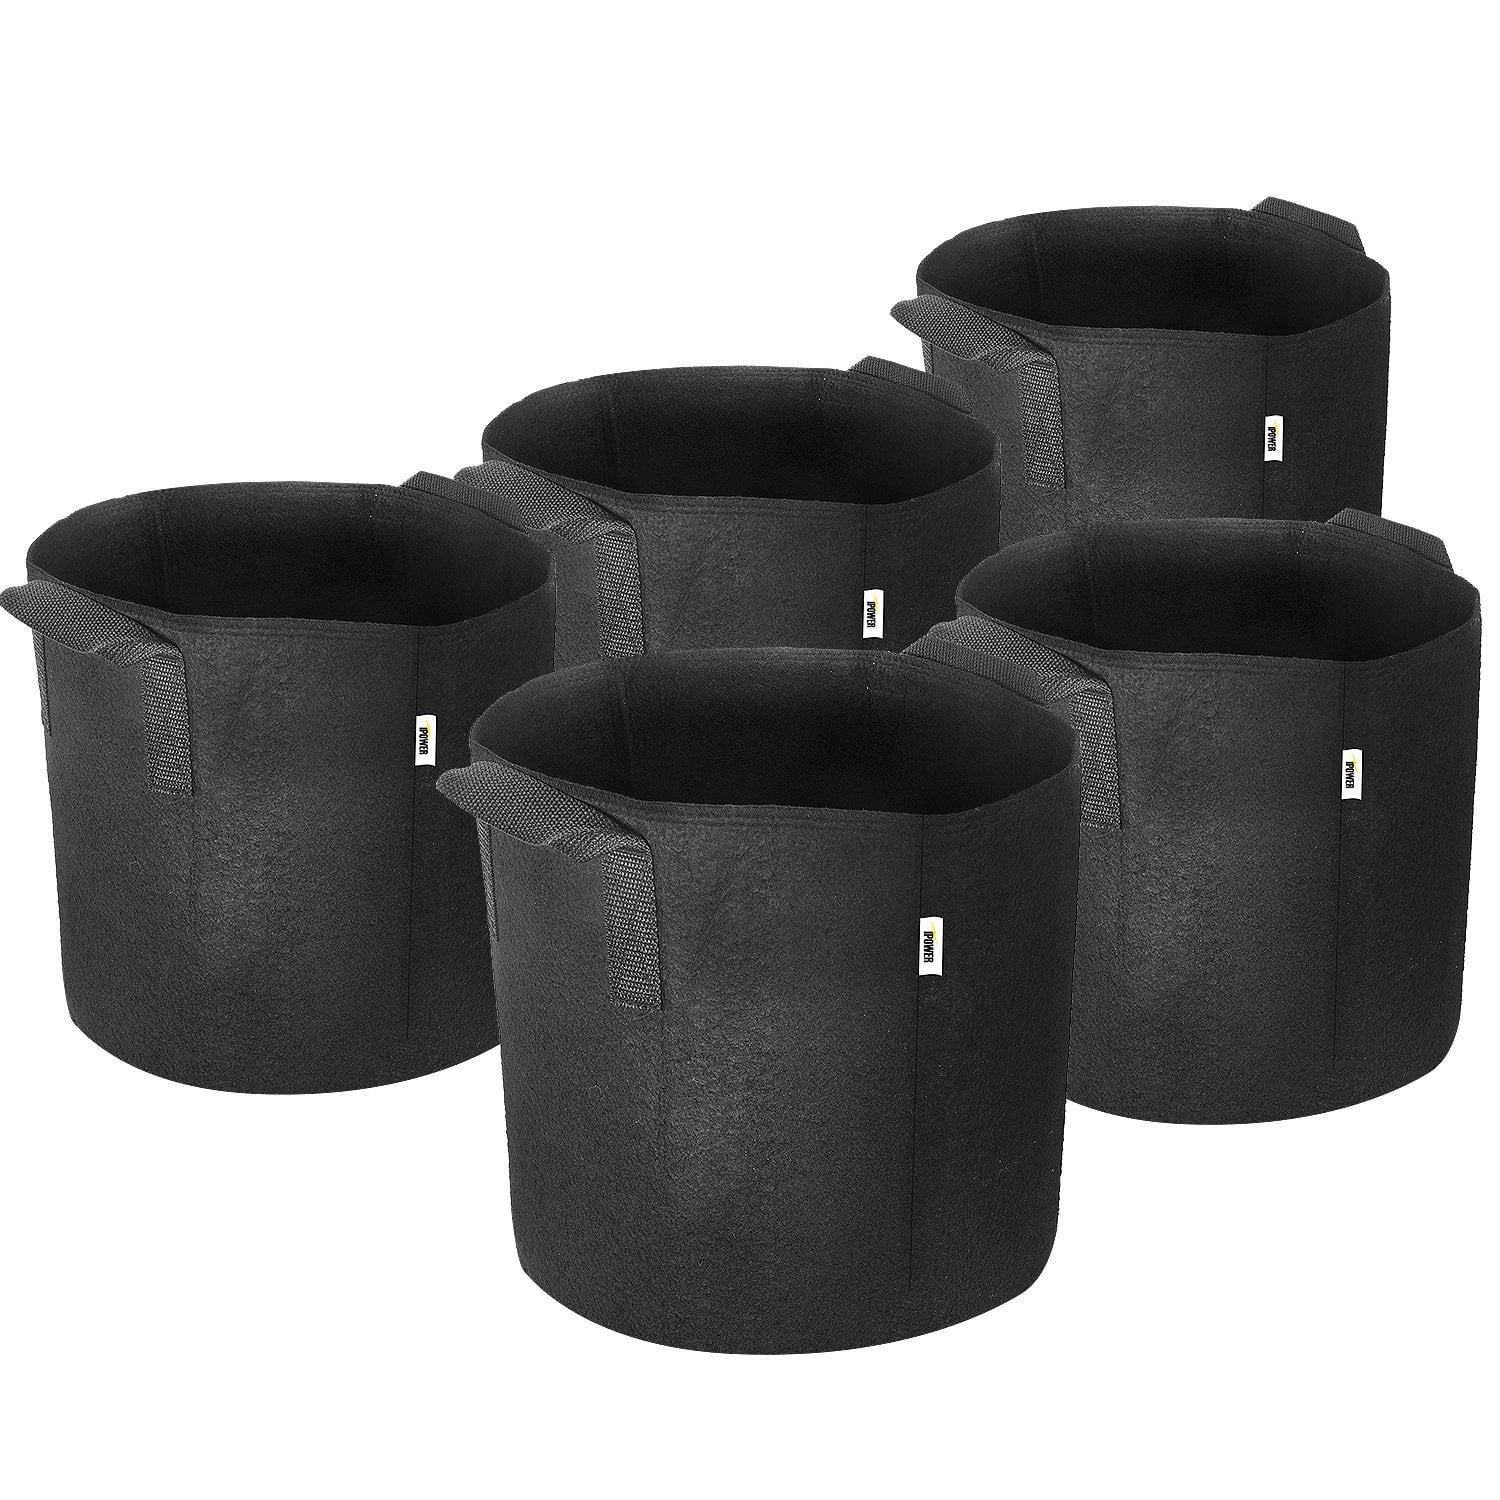 5 Size Fabric Pots Plant Pouch Root Container Grow Bag Aeration Garden Tools 